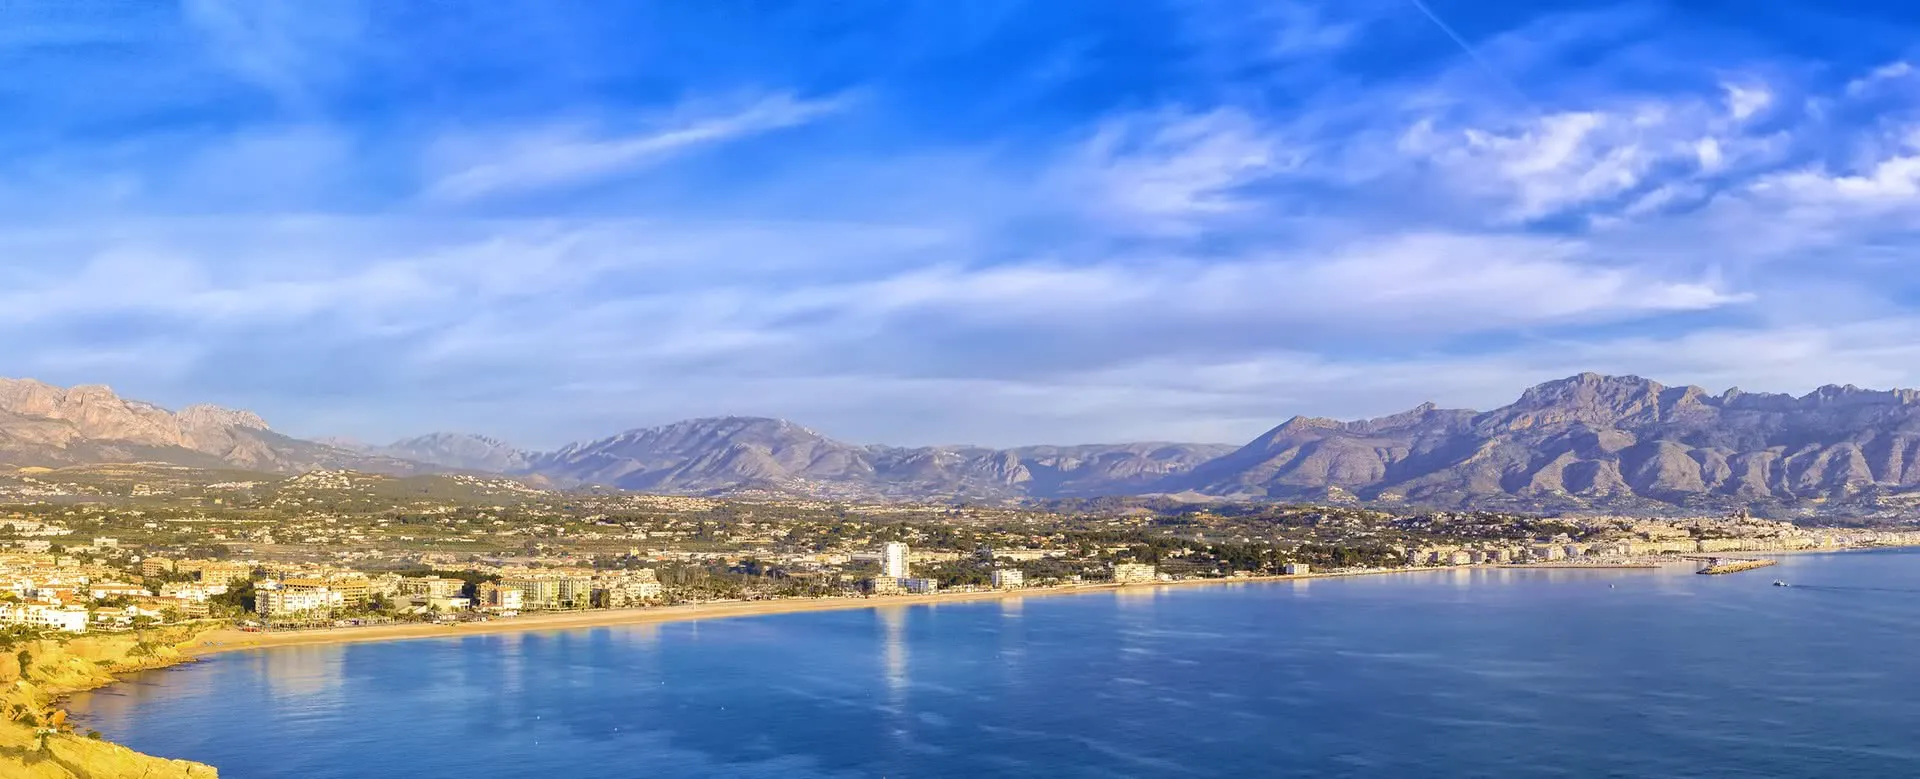 Alicante - the destination with youth hostels